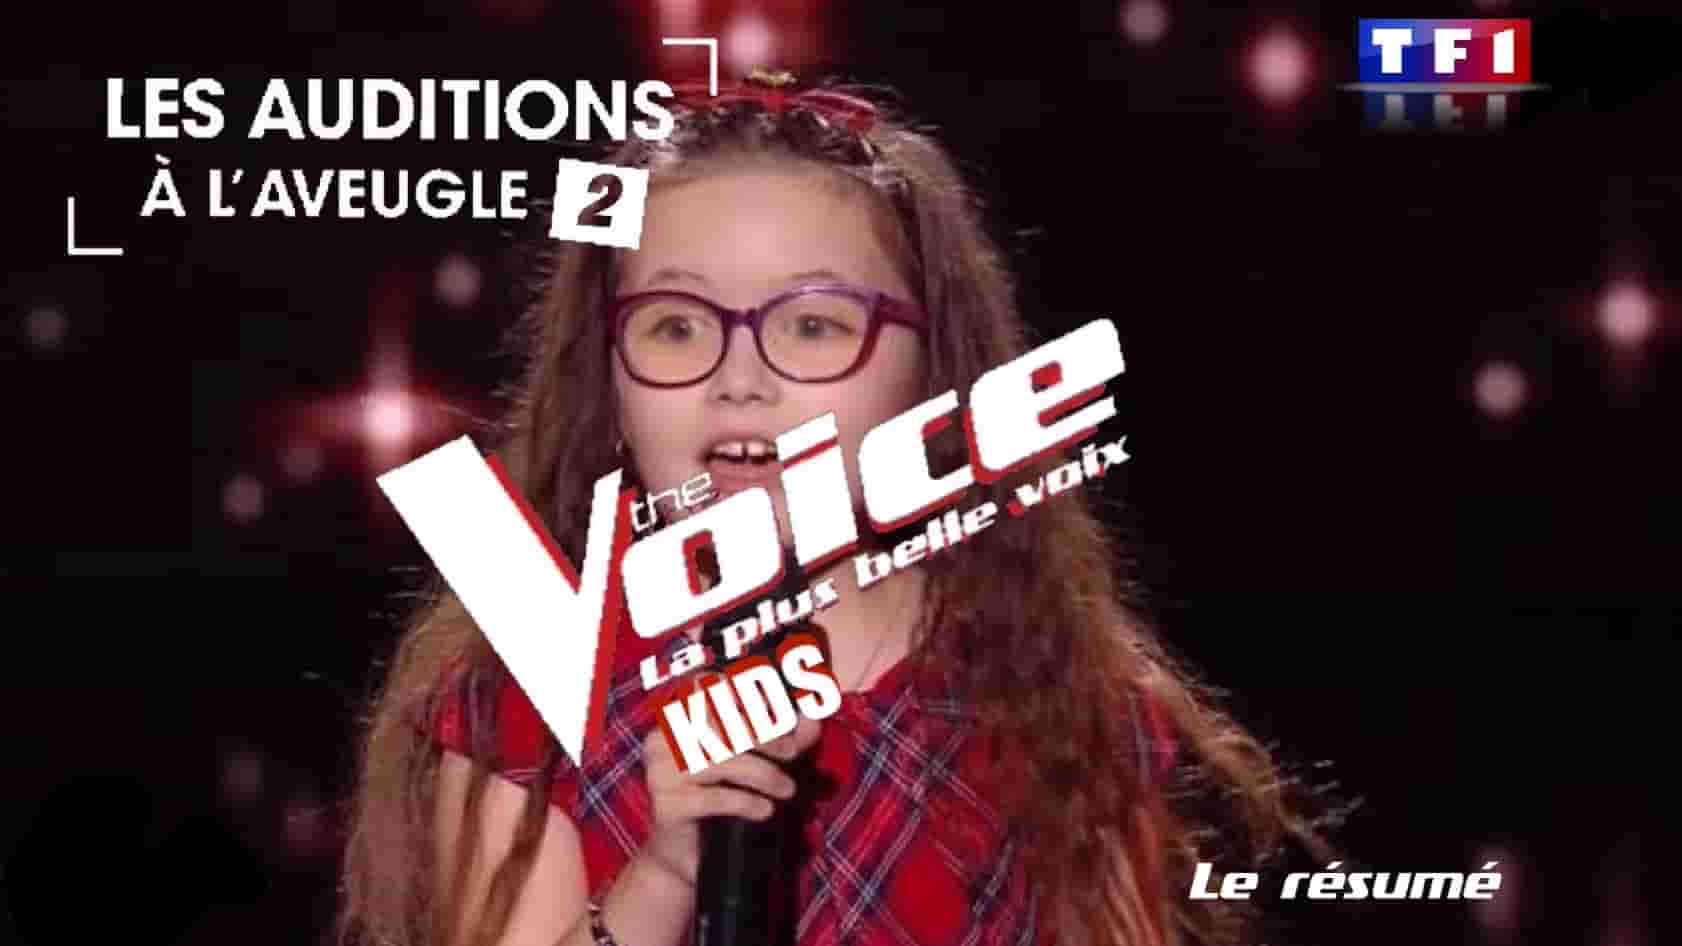 The Voice Kids 5 : Auditions 2 - ©/-\ll in One TV, All rights reserved. Do not copy. Reproduction Interdite